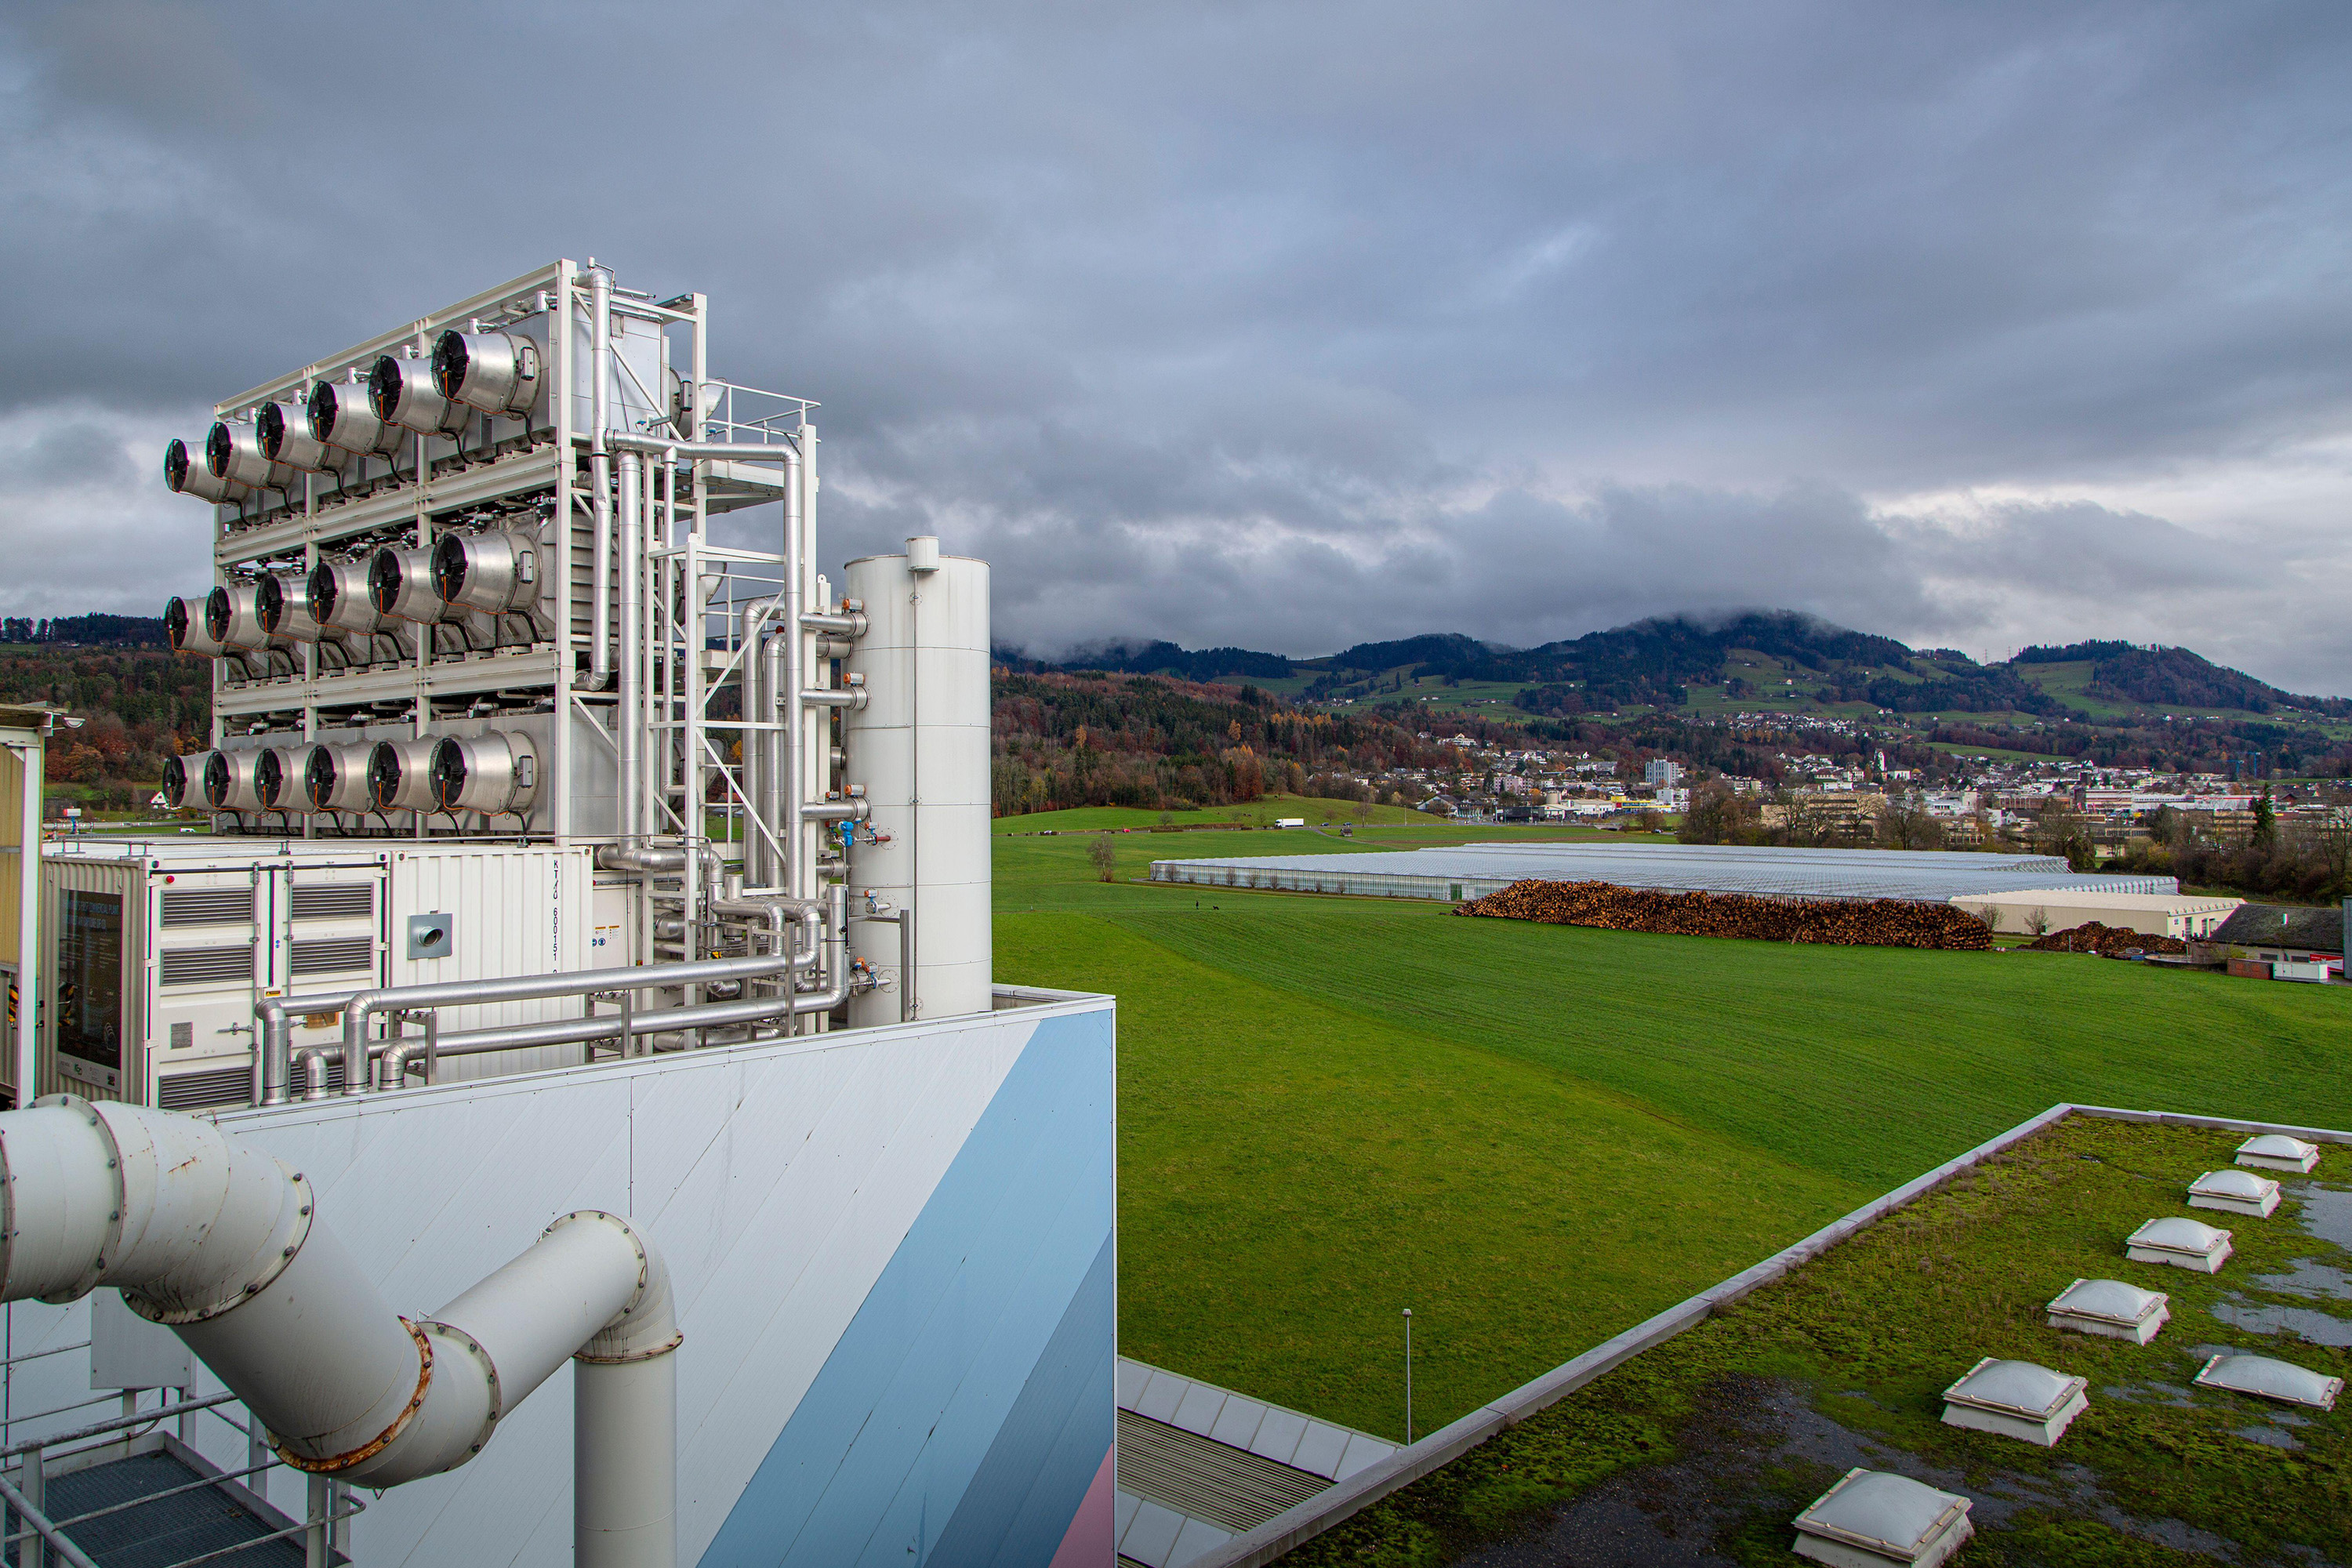 Climeworks are running 30 DAC - Direct Air Capture - fans on the roof of this garbage incinerator in Hinwil